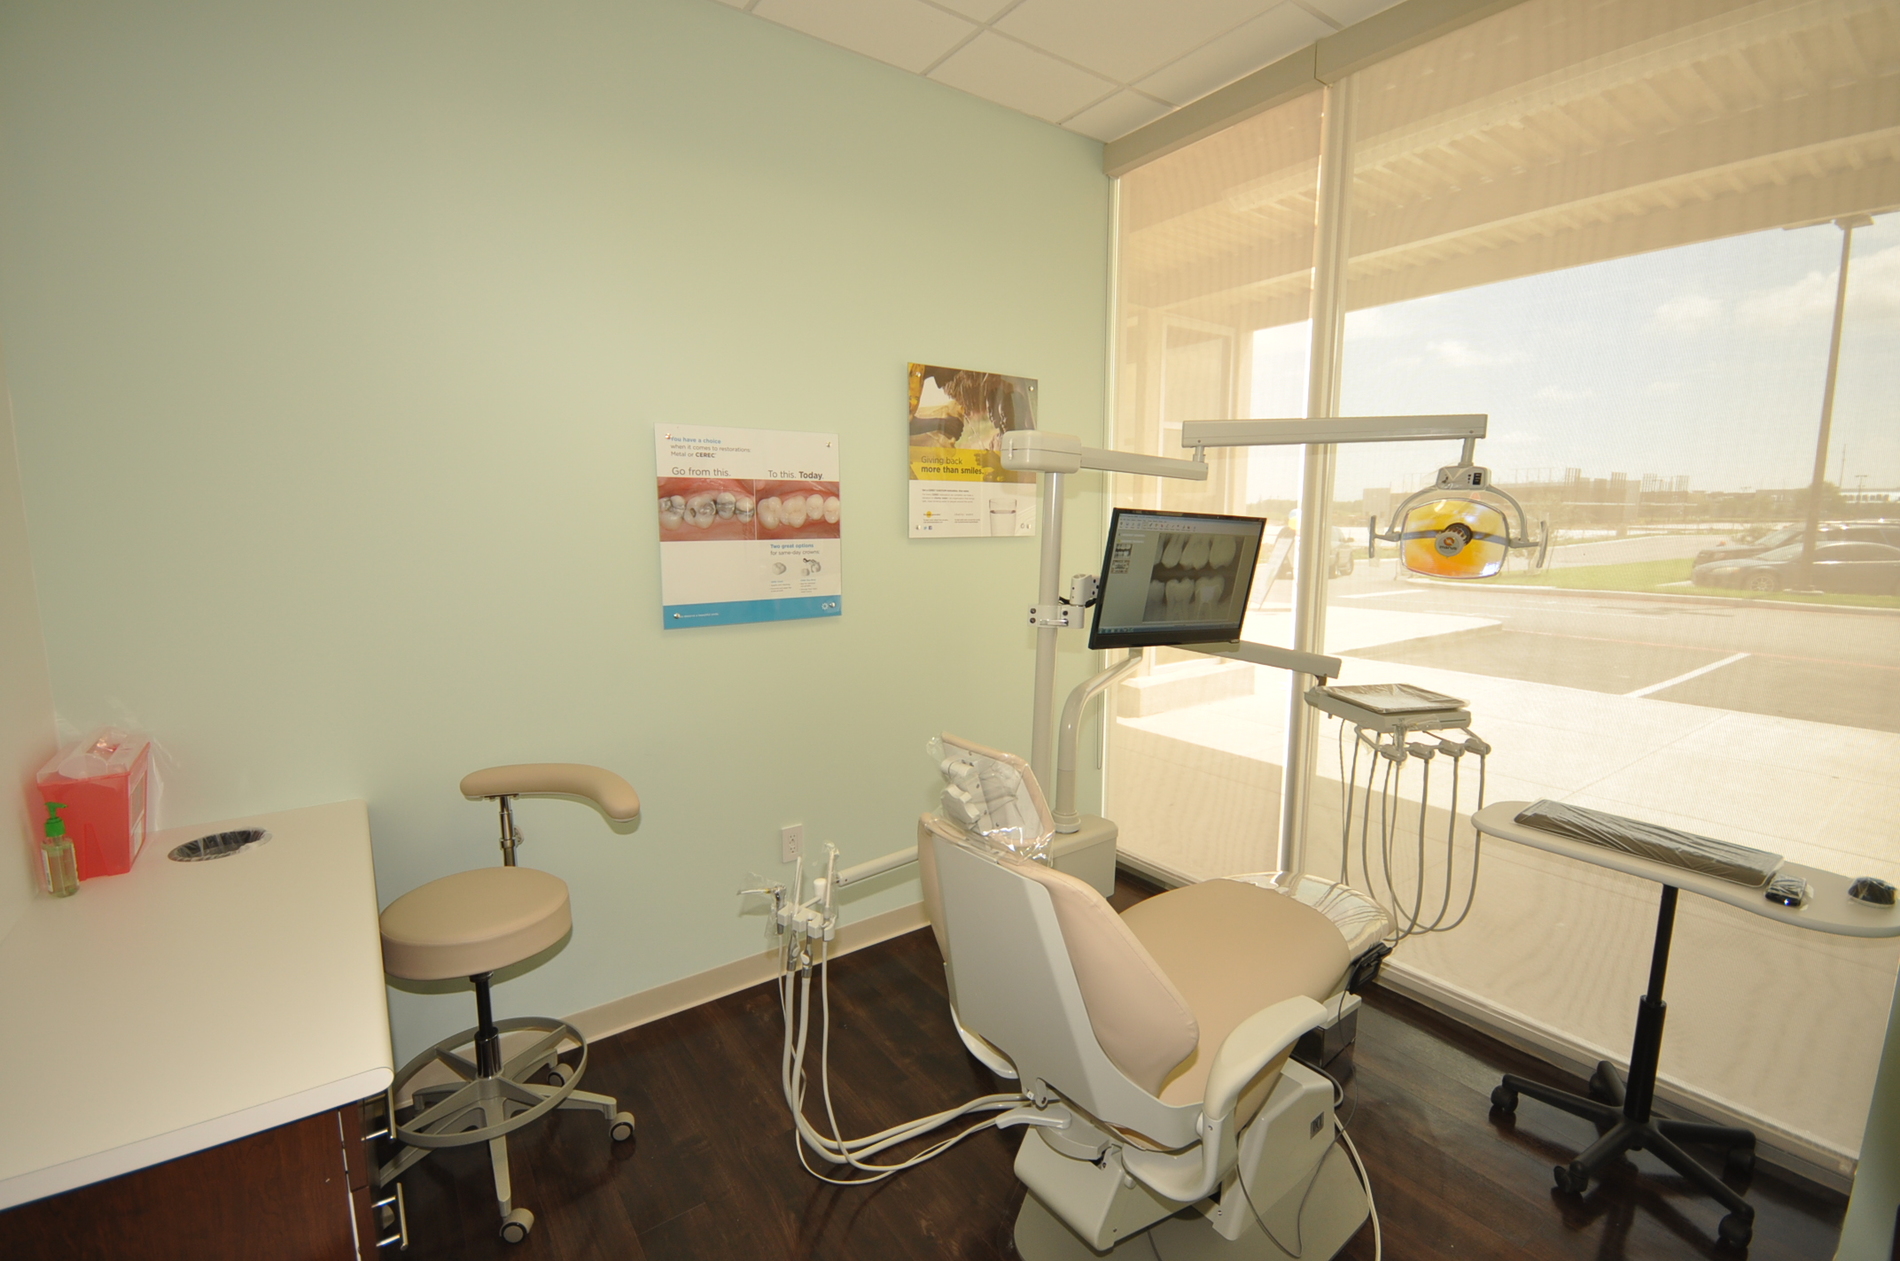 Images Pearland Dentists